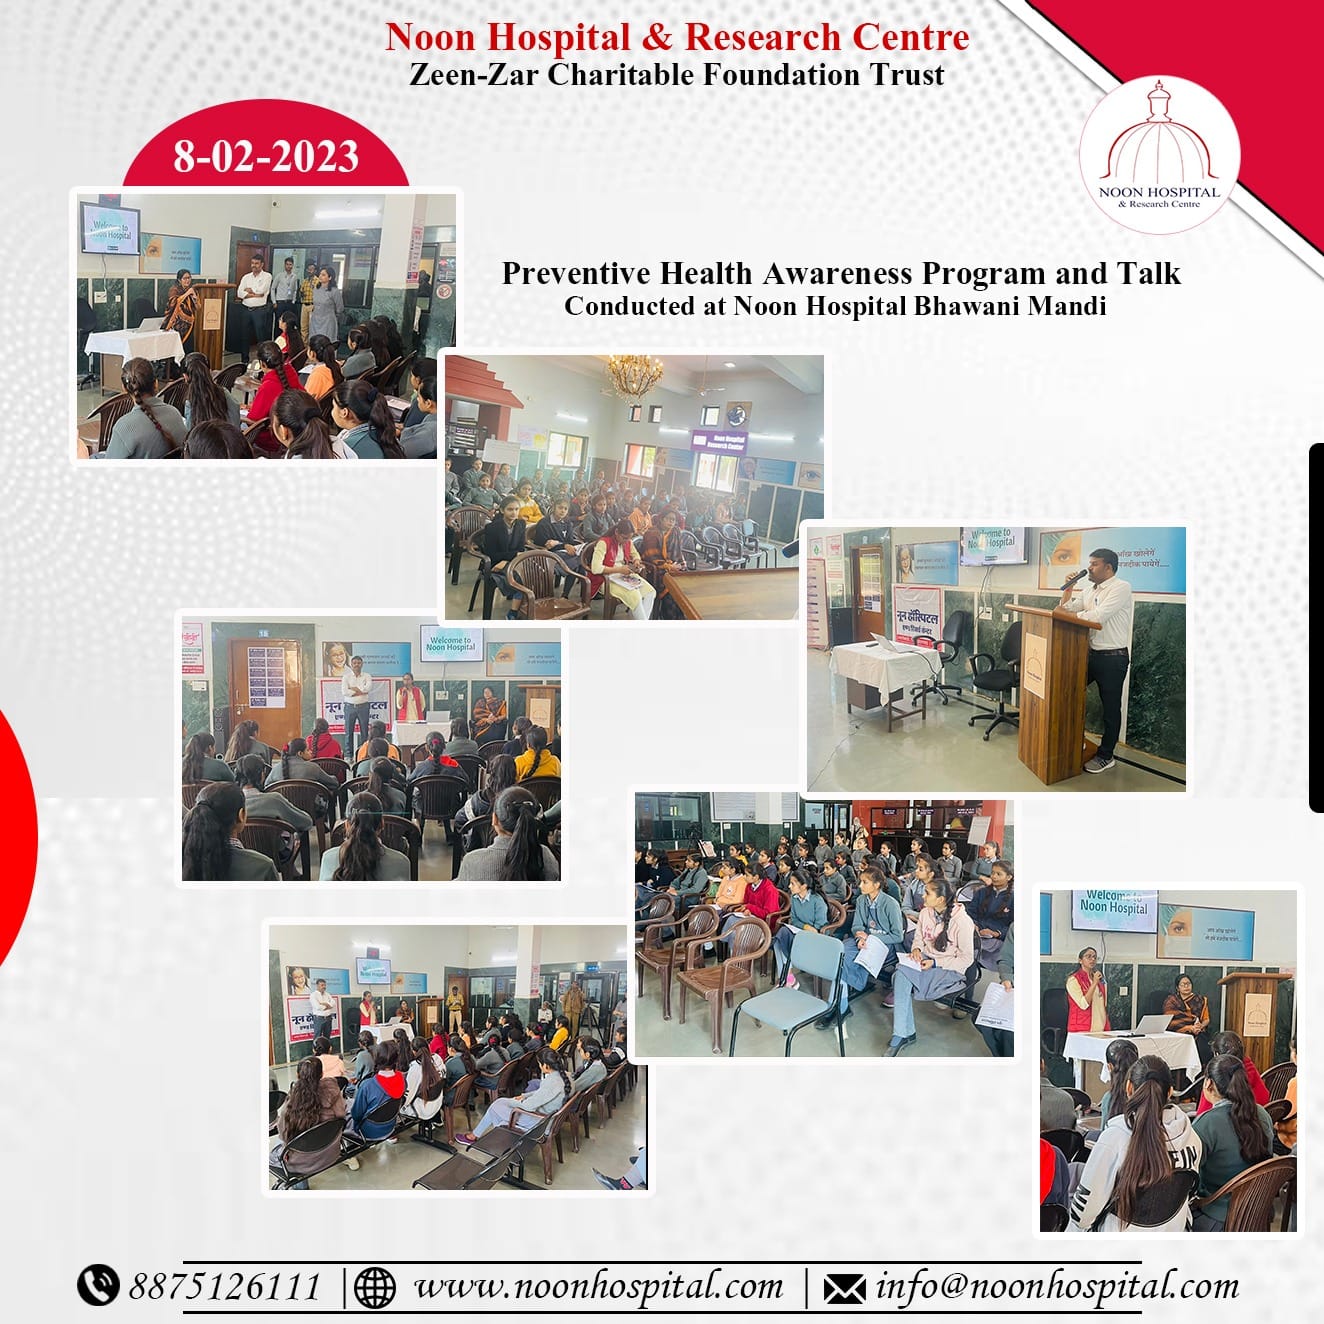 Girls Health and Social Awareness program conducted at Noon Hospital. Dr. Bandana Paul, Pediatrician of Noon Hospital addressed the girl students in the program.